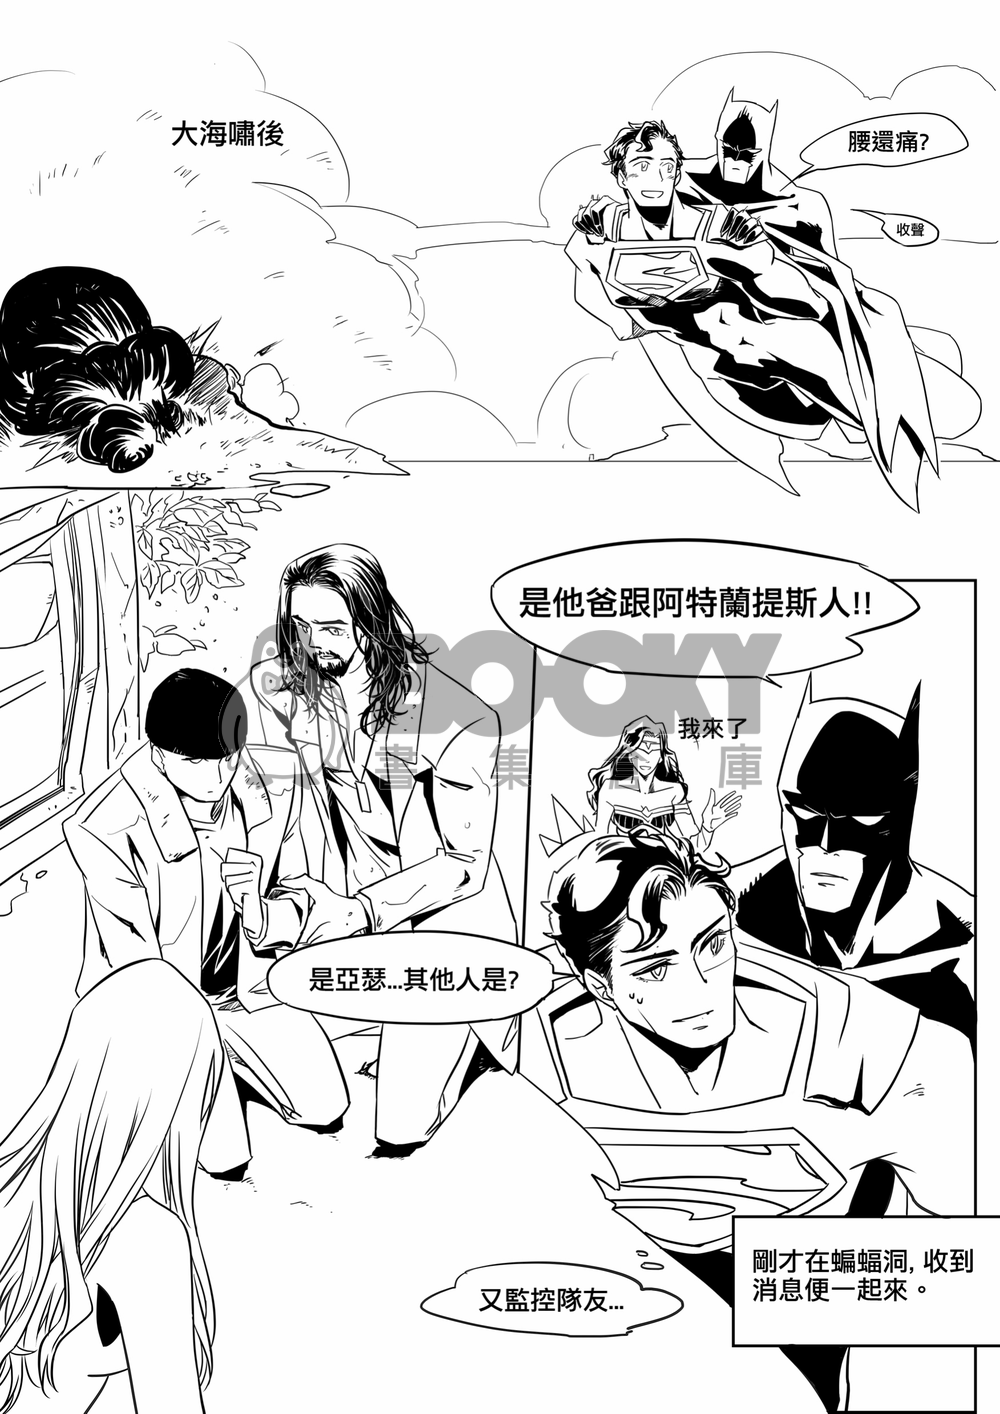 JUSTICE LEAGUE ALWAYS BE WITH YOU 試閱圖片